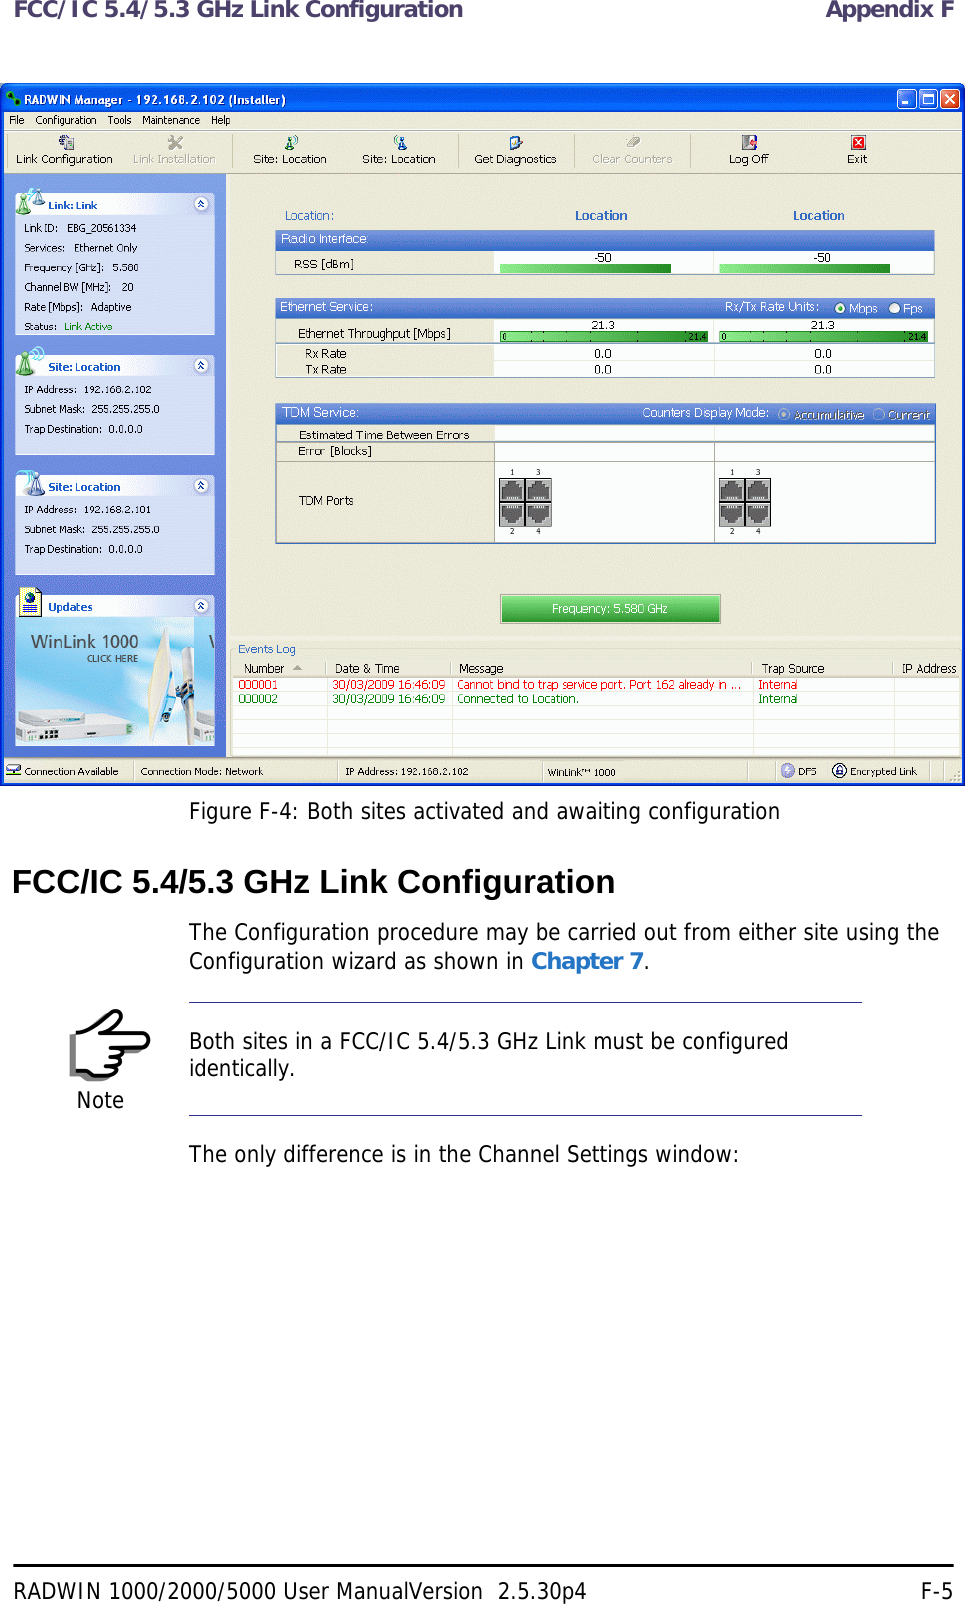 FCC/IC 5.4/5.3 GHz Link Configuration Appendix FRADWIN 1000/2000/5000 User ManualVersion  2.5.30p4 F-5Figure F-4: Both sites activated and awaiting configurationFCC/IC 5.4/5.3 GHz Link ConfigurationThe Configuration procedure may be carried out from either site using the Configuration wizard as shown in Chapter 7. The only difference is in the Channel Settings window:NoteBoth sites in a FCC/IC 5.4/5.3 GHz Link must be configured identically.